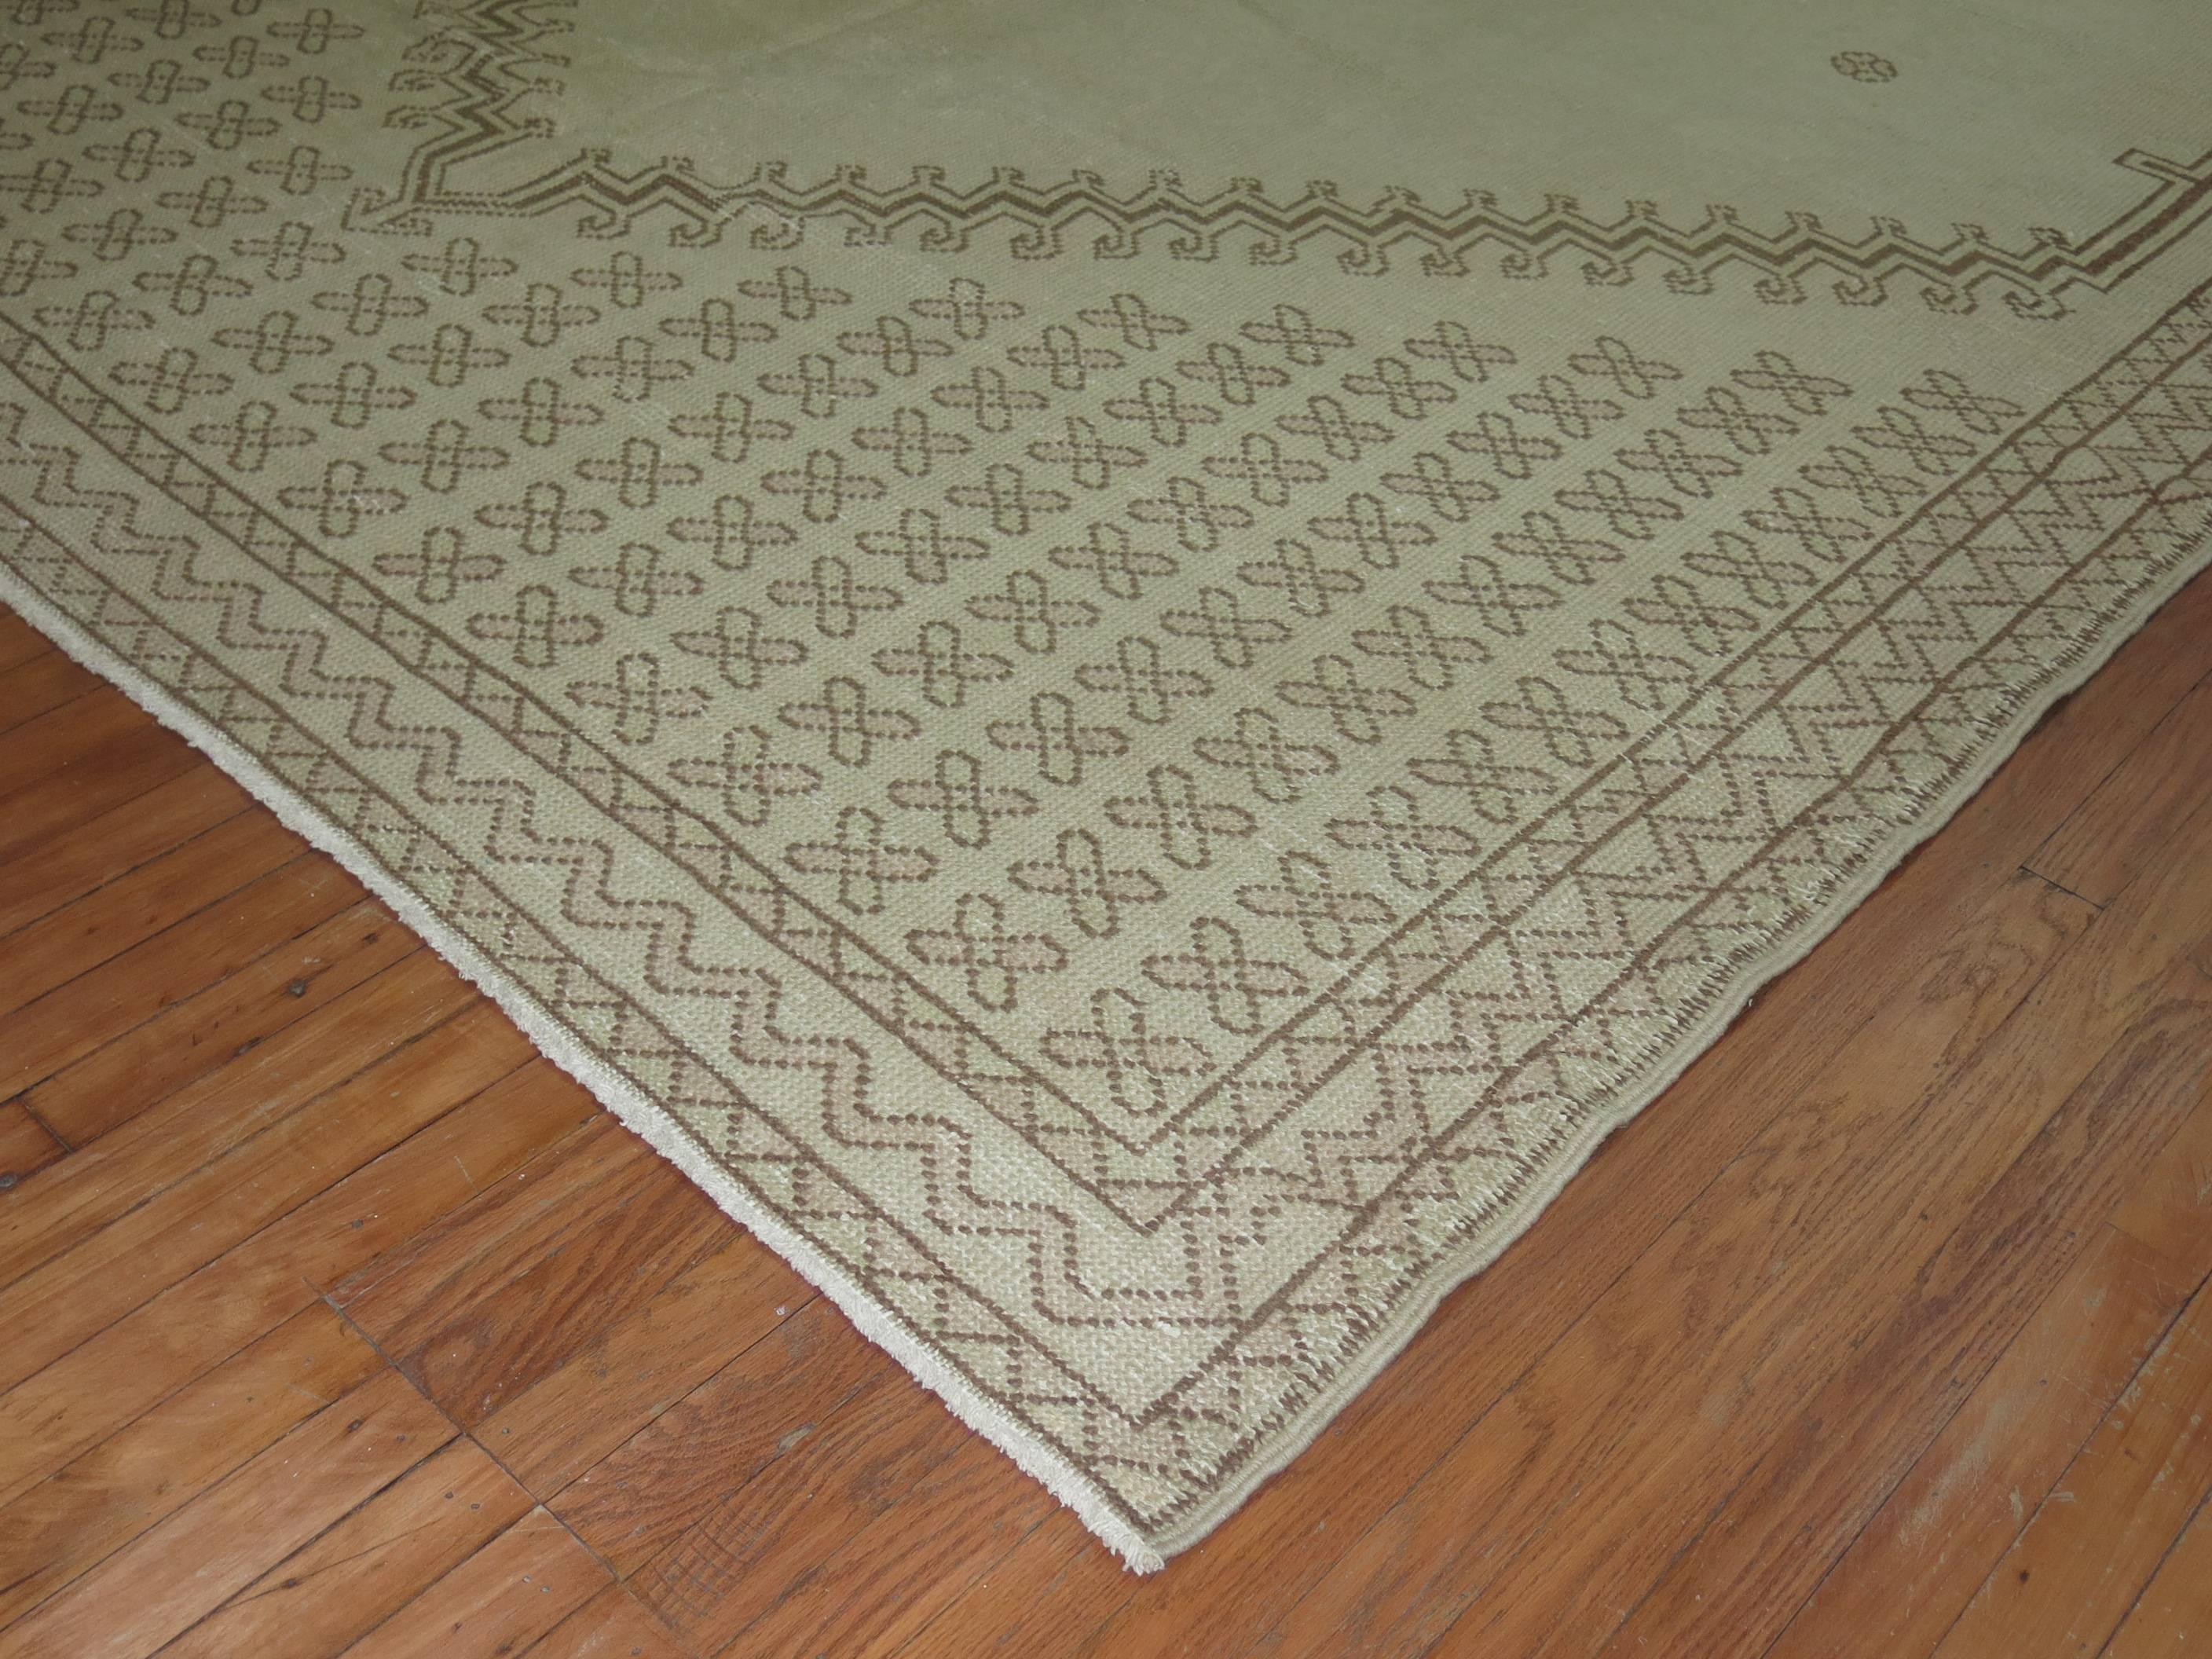 Rare size vintage Moroccan rug in khaki and brown. Some blush outline accents within the field and border. This piece has some scattered visible repairs and originates from the second quarter of the 20th century.

Measures: 8'10